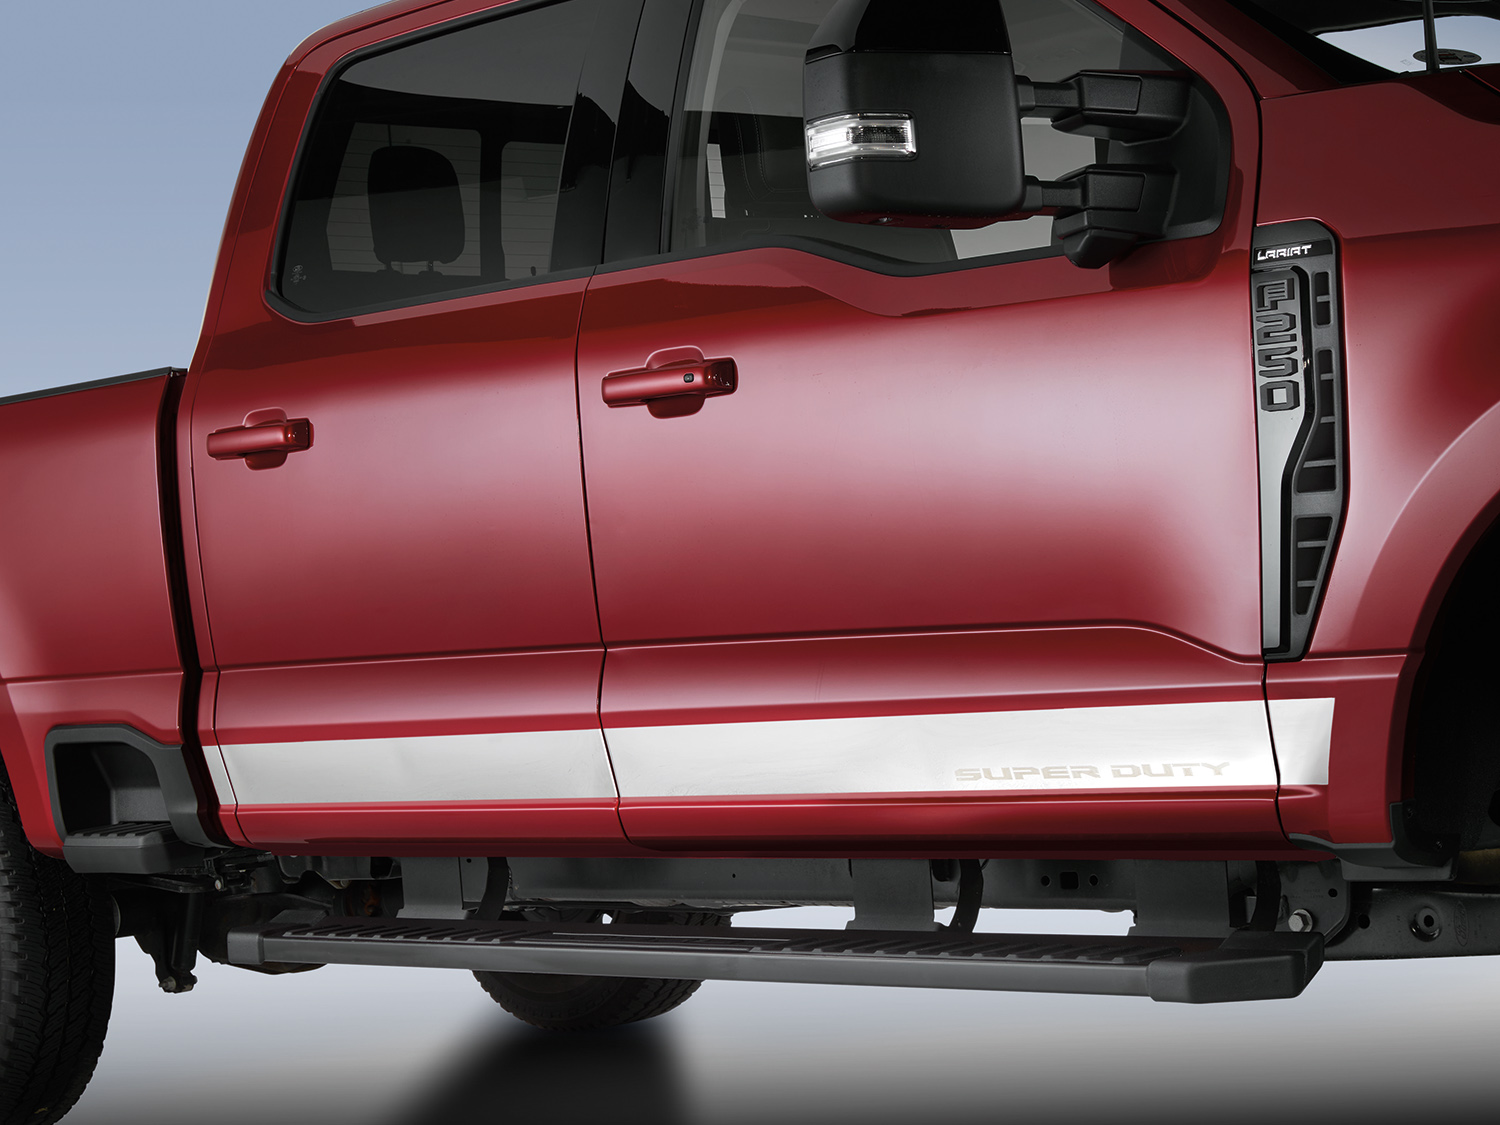 Image for Door Molding Kit (Rocker Panel) by Putco, Crew Cab, 6.75' Bed, Stainless Steel from AccessoriesCanada